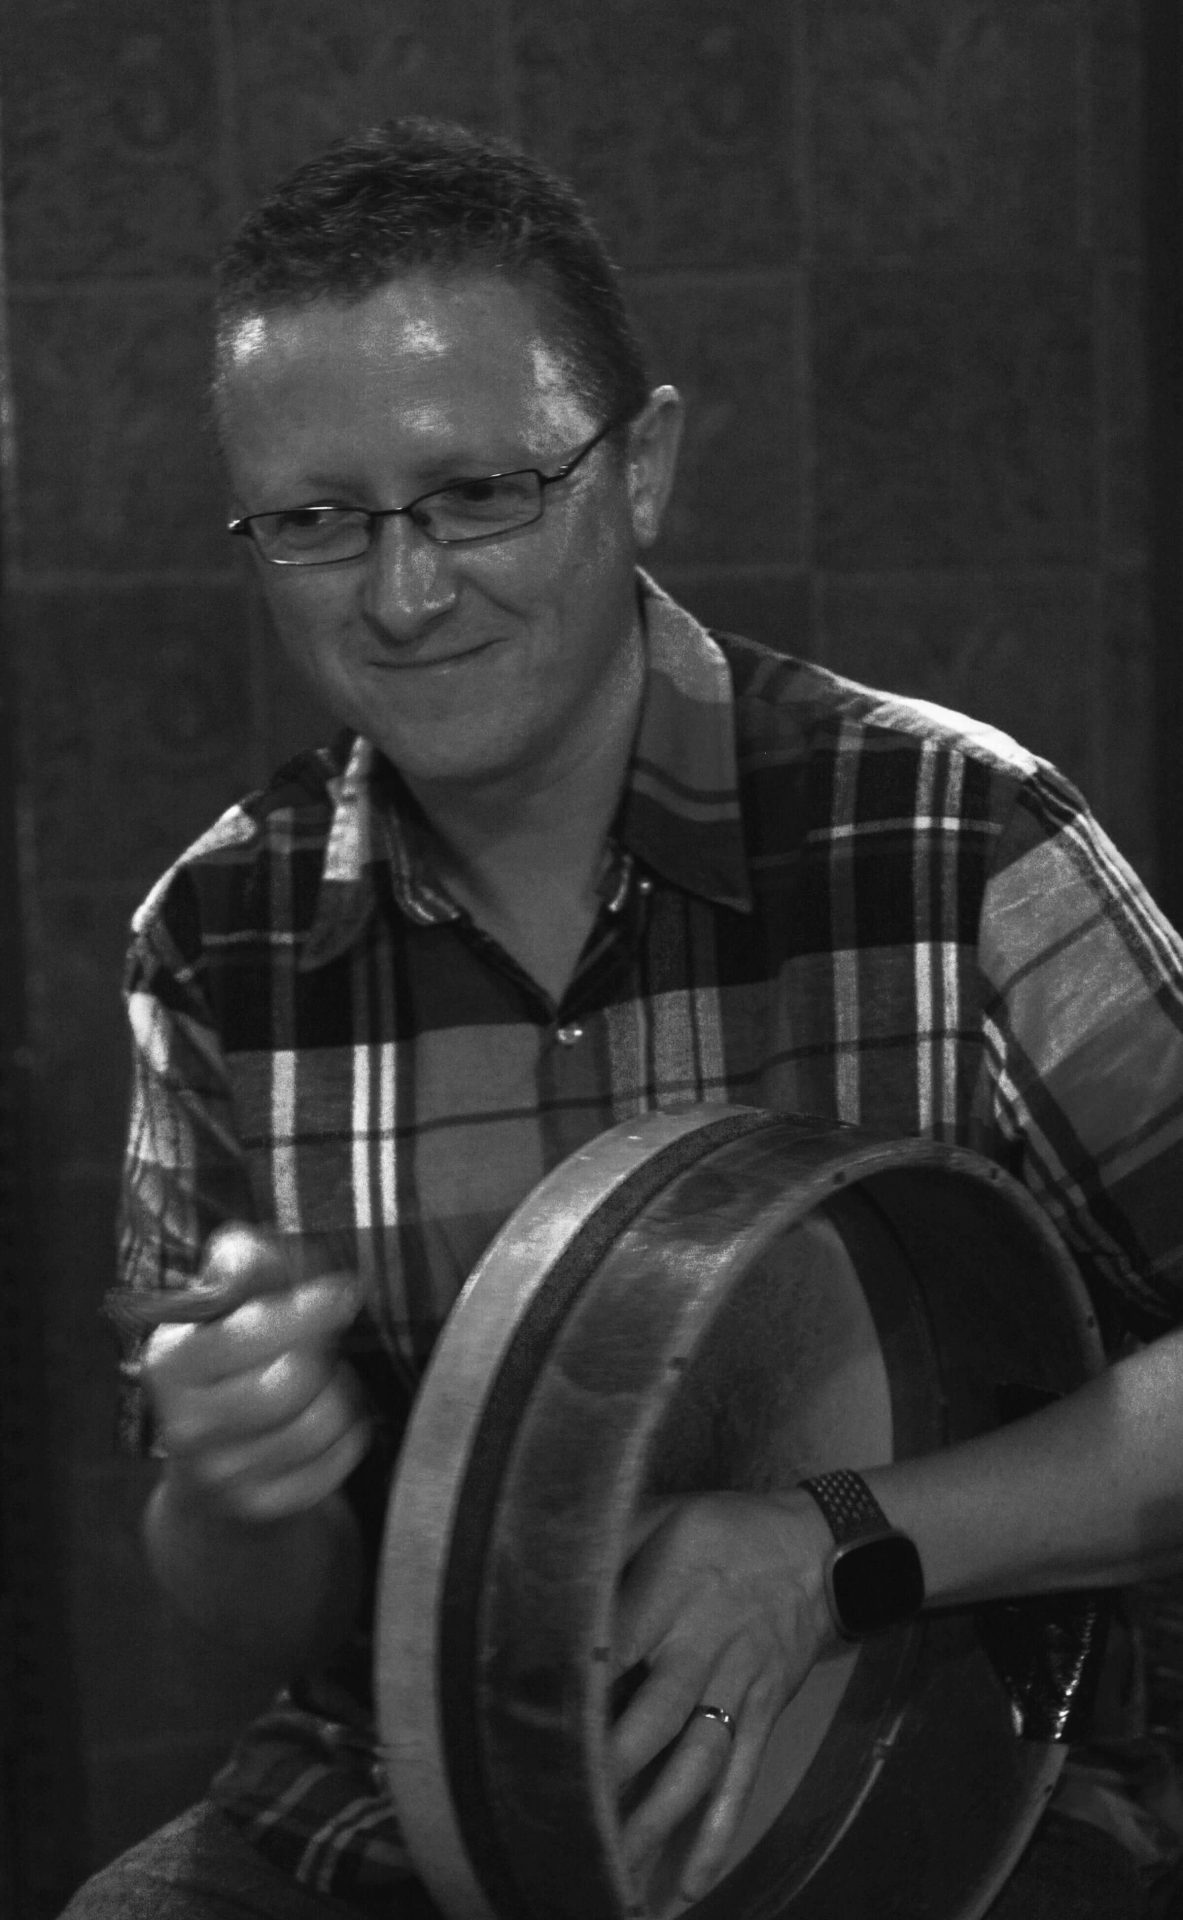 Brian Morrissey from The Oars playing the bodhrán